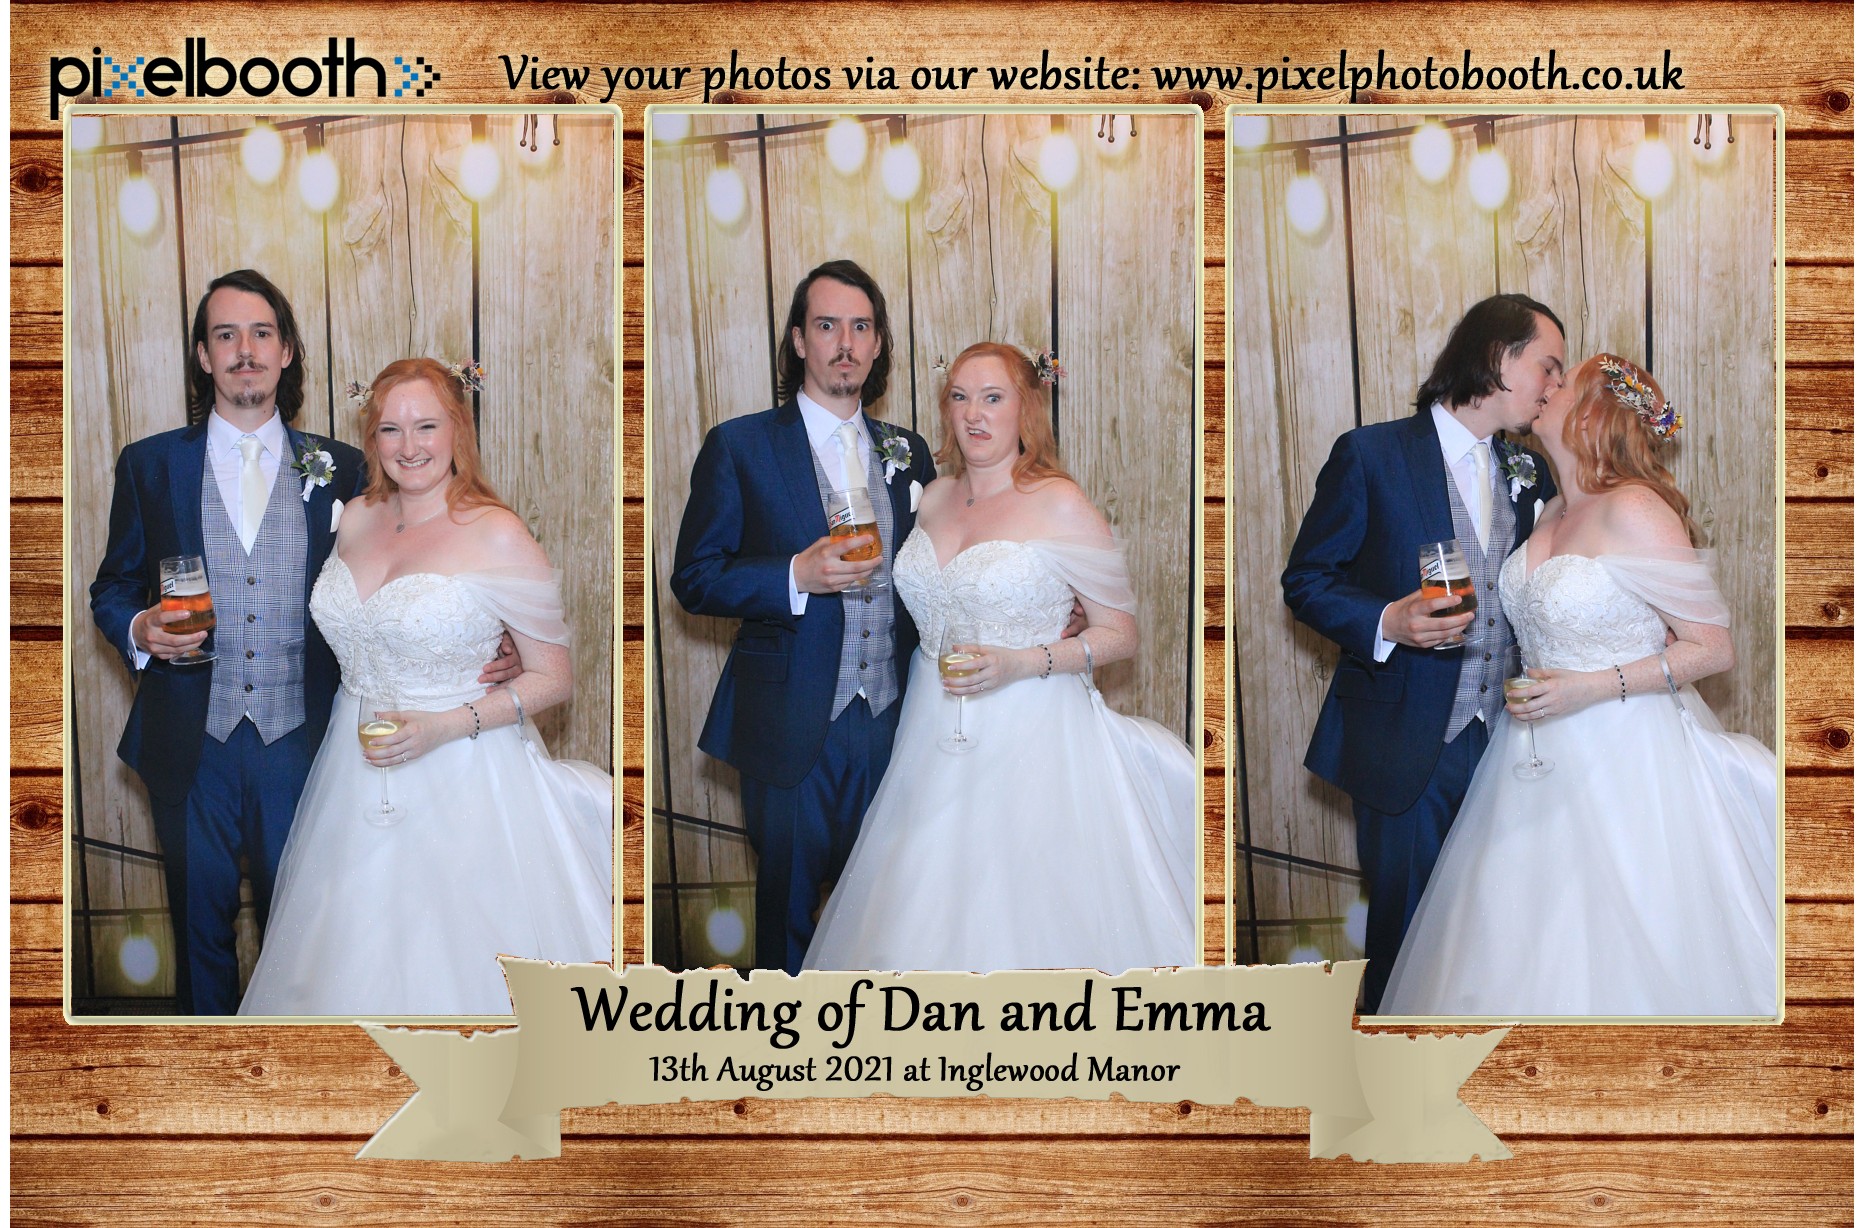 13th August 2021: Dan and Emma's Wedding at Inglewood Manor